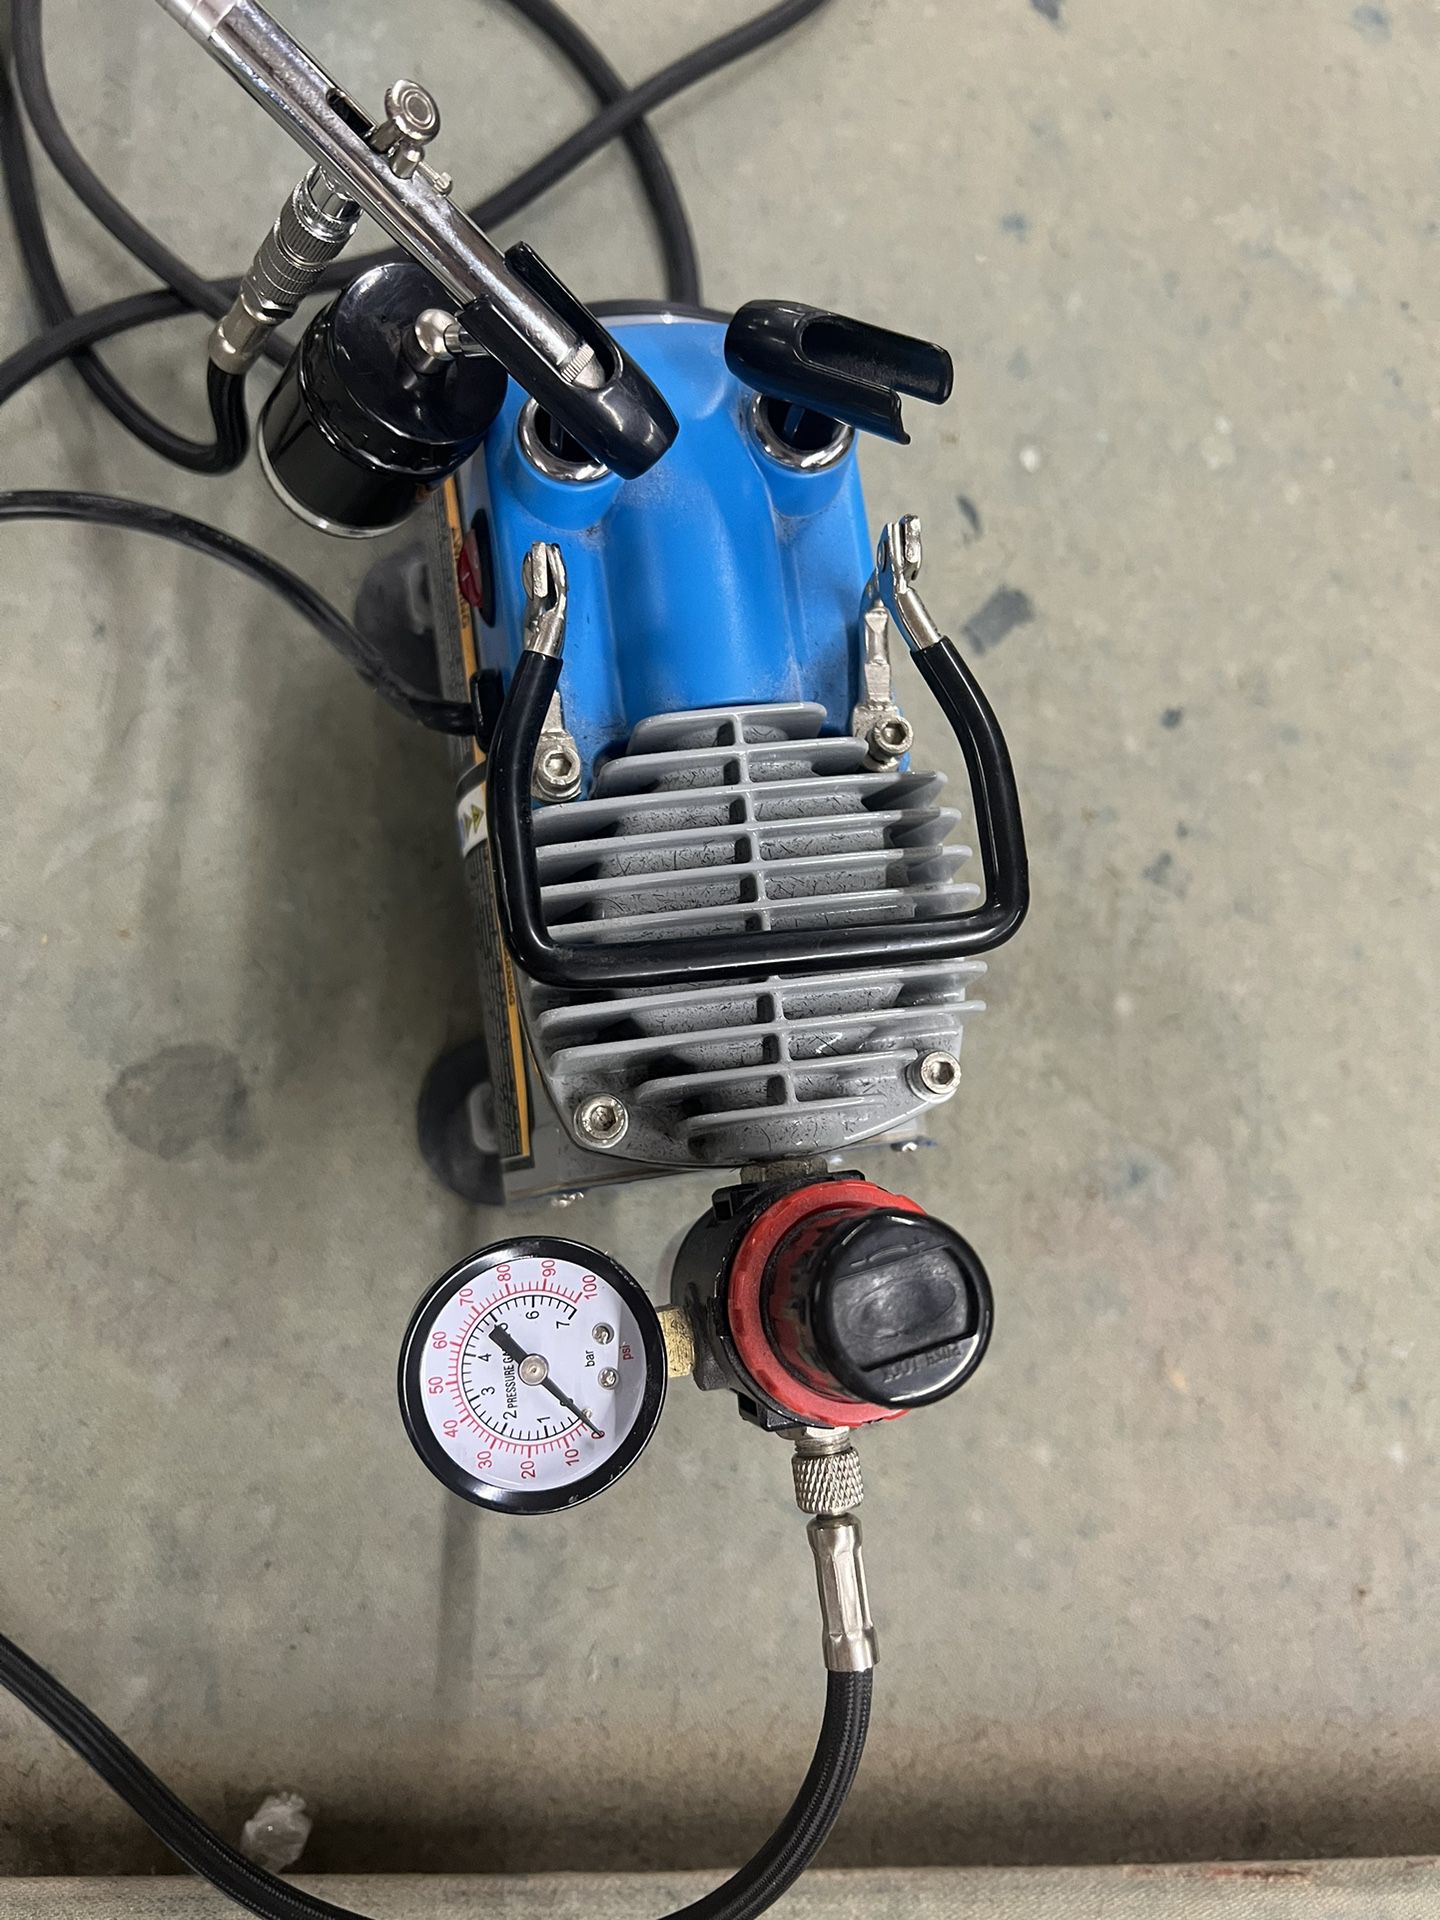 Airbrush With Compressor Combo Kit(Avanti) for Sale in Riverside, CA -  OfferUp